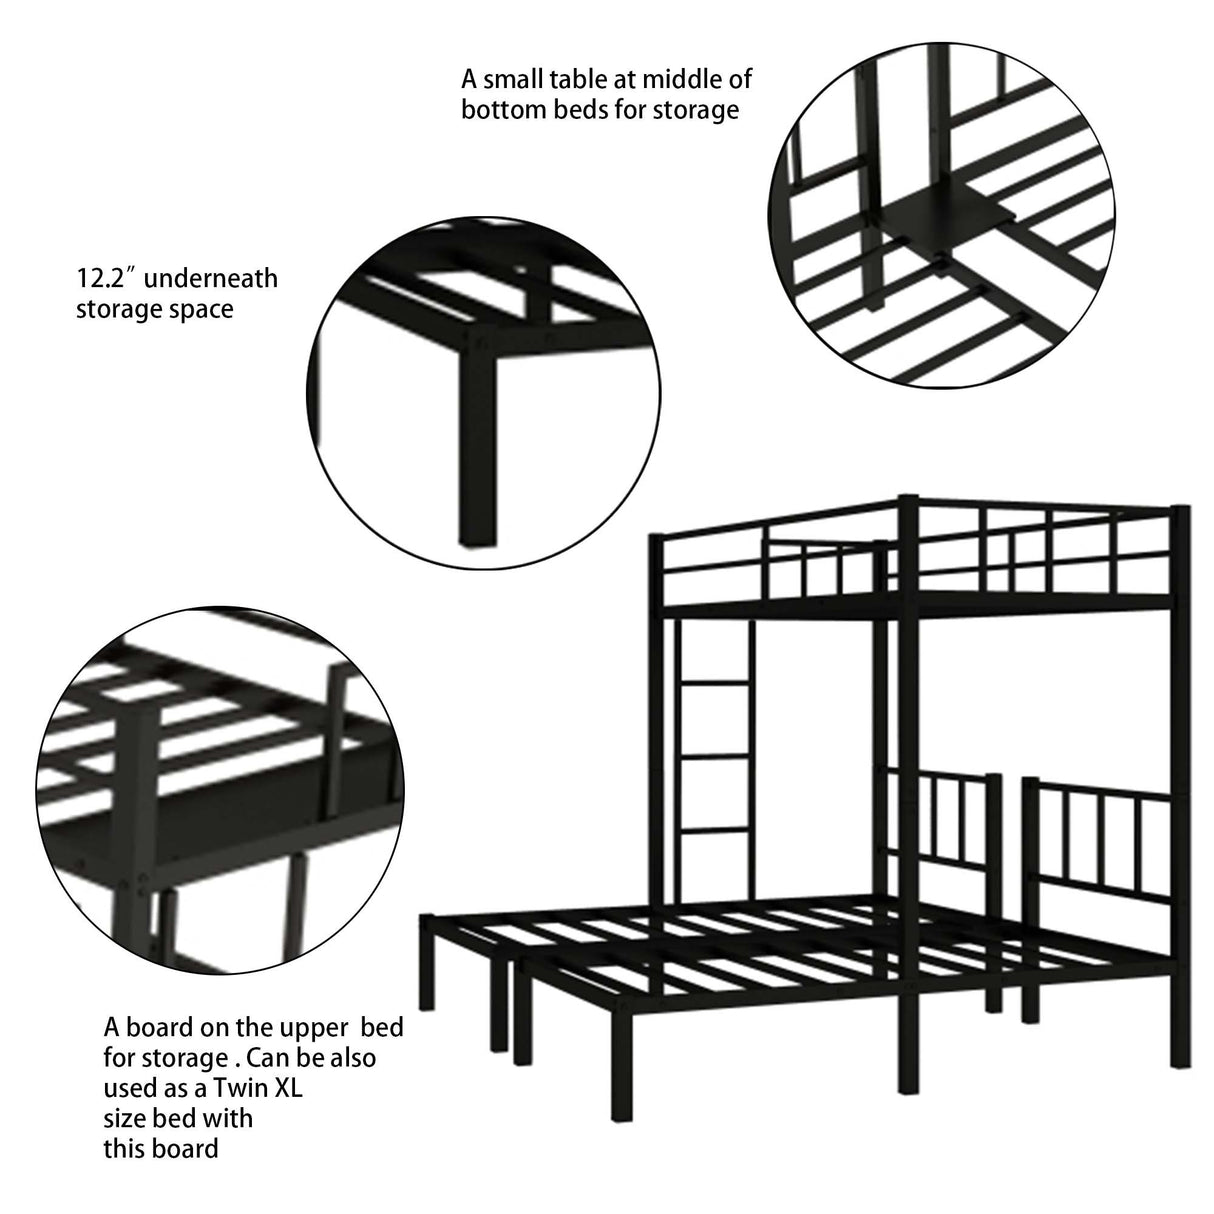 Twin over Twin & Twin Bunk Beds for 3, Twin XL over Twin & Twin Bunk Bed Metal Triple Bunk Bed, Black (Pre-sale date: June 10th) - Home Elegance USA